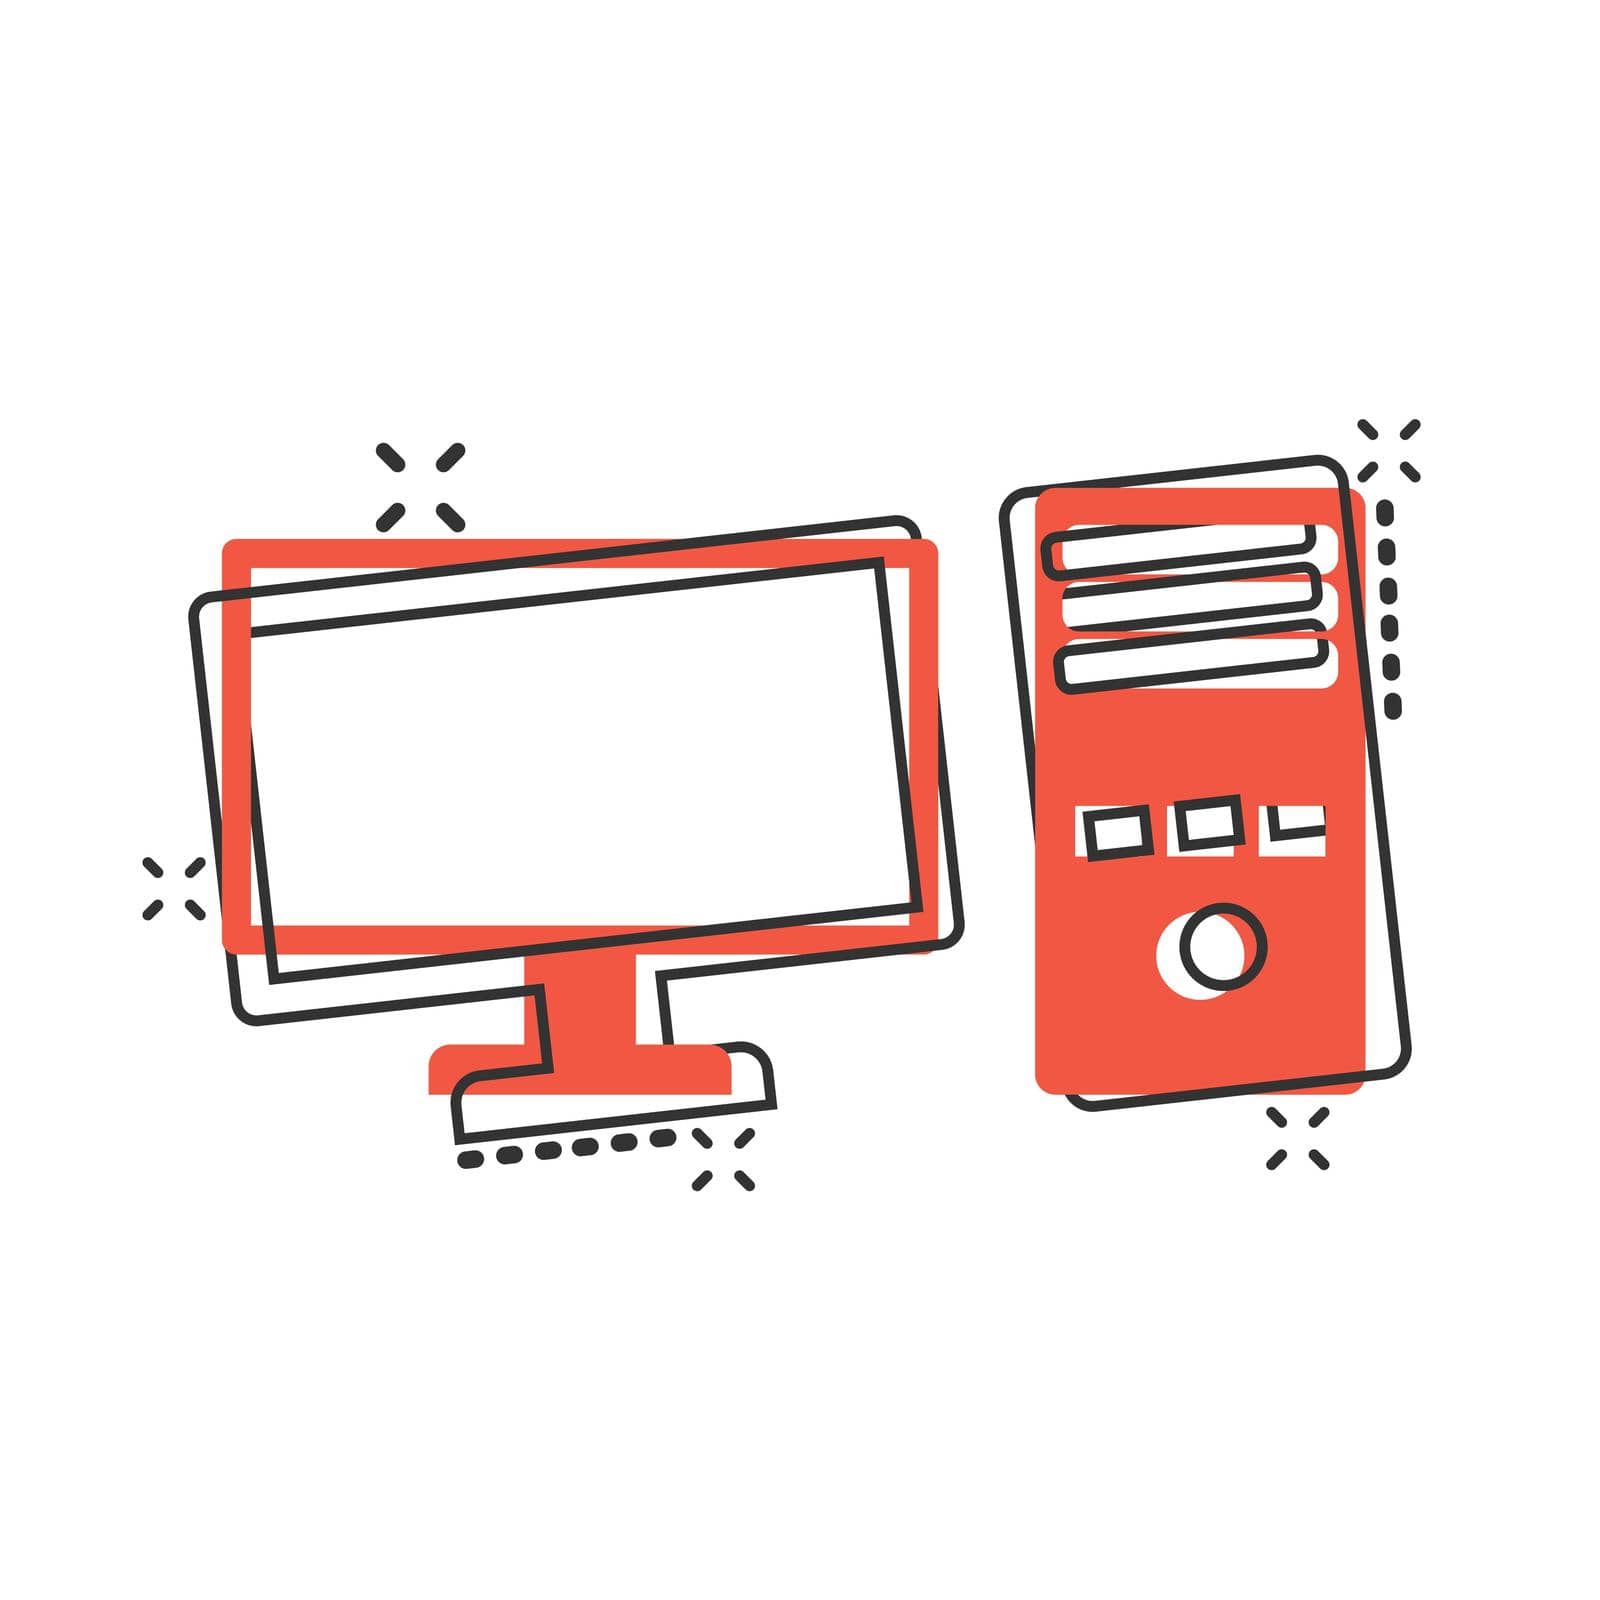 Pc computer icon in comic style. Desktop cartoon vector illustration on white isolated background. Device monitor splash effect business concept.